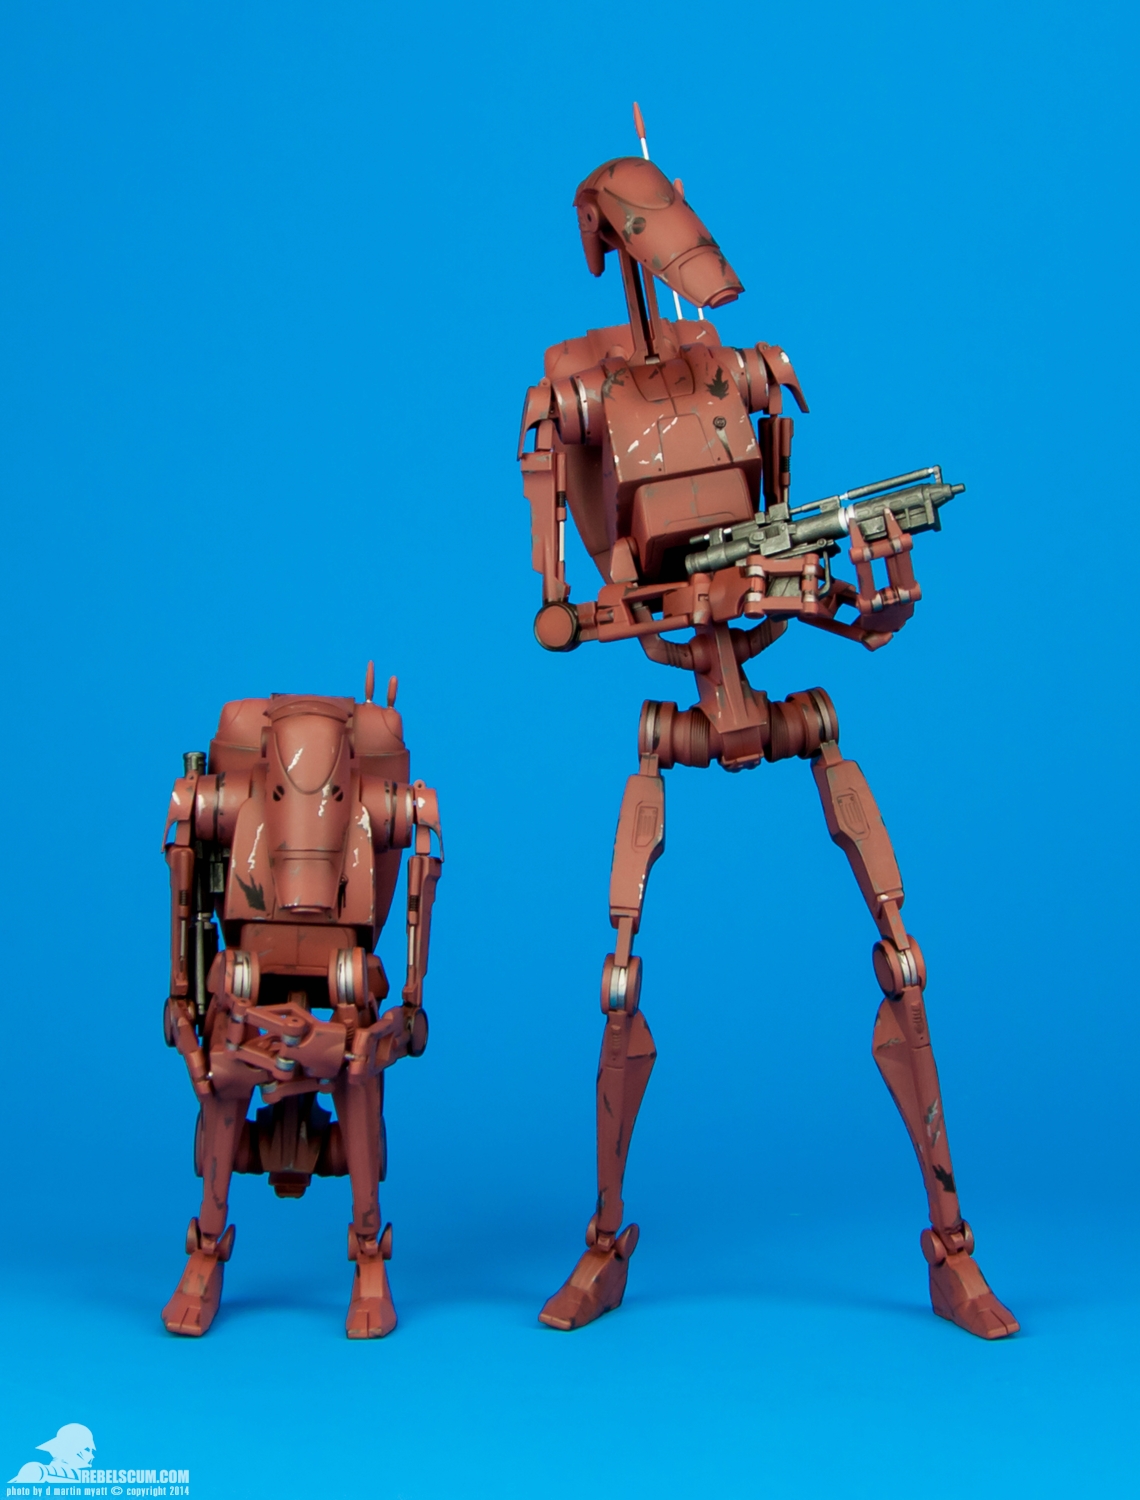 Geonosis-Infantry-Battle-Droids-Sixth-Scale-Sideshow-005.jpg